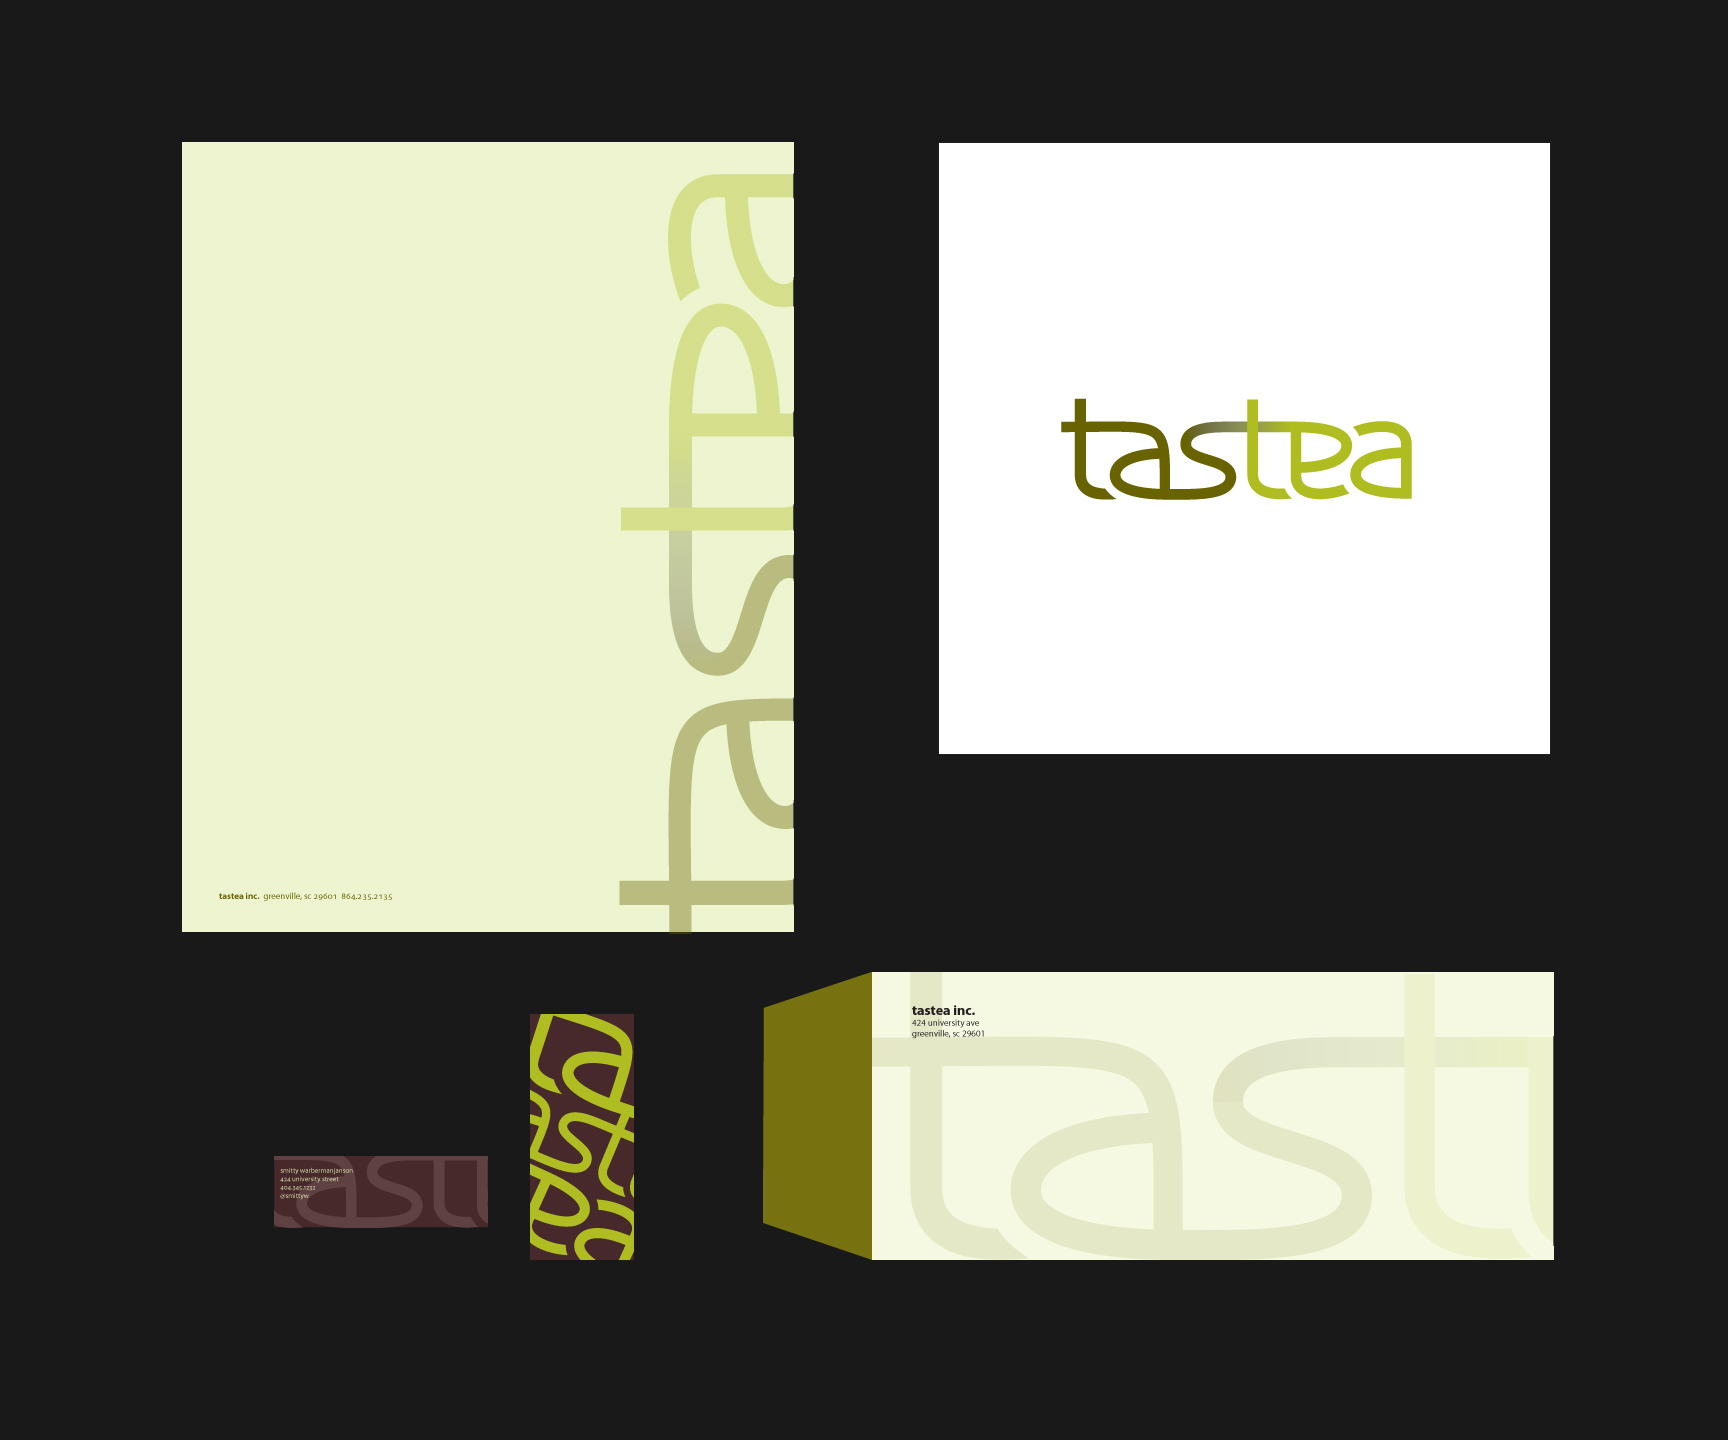  A full brand identity for an imagined tea business. Includes earthy tones and a contemporary custom sans serif logotype to attract a younger audience. (2012) 